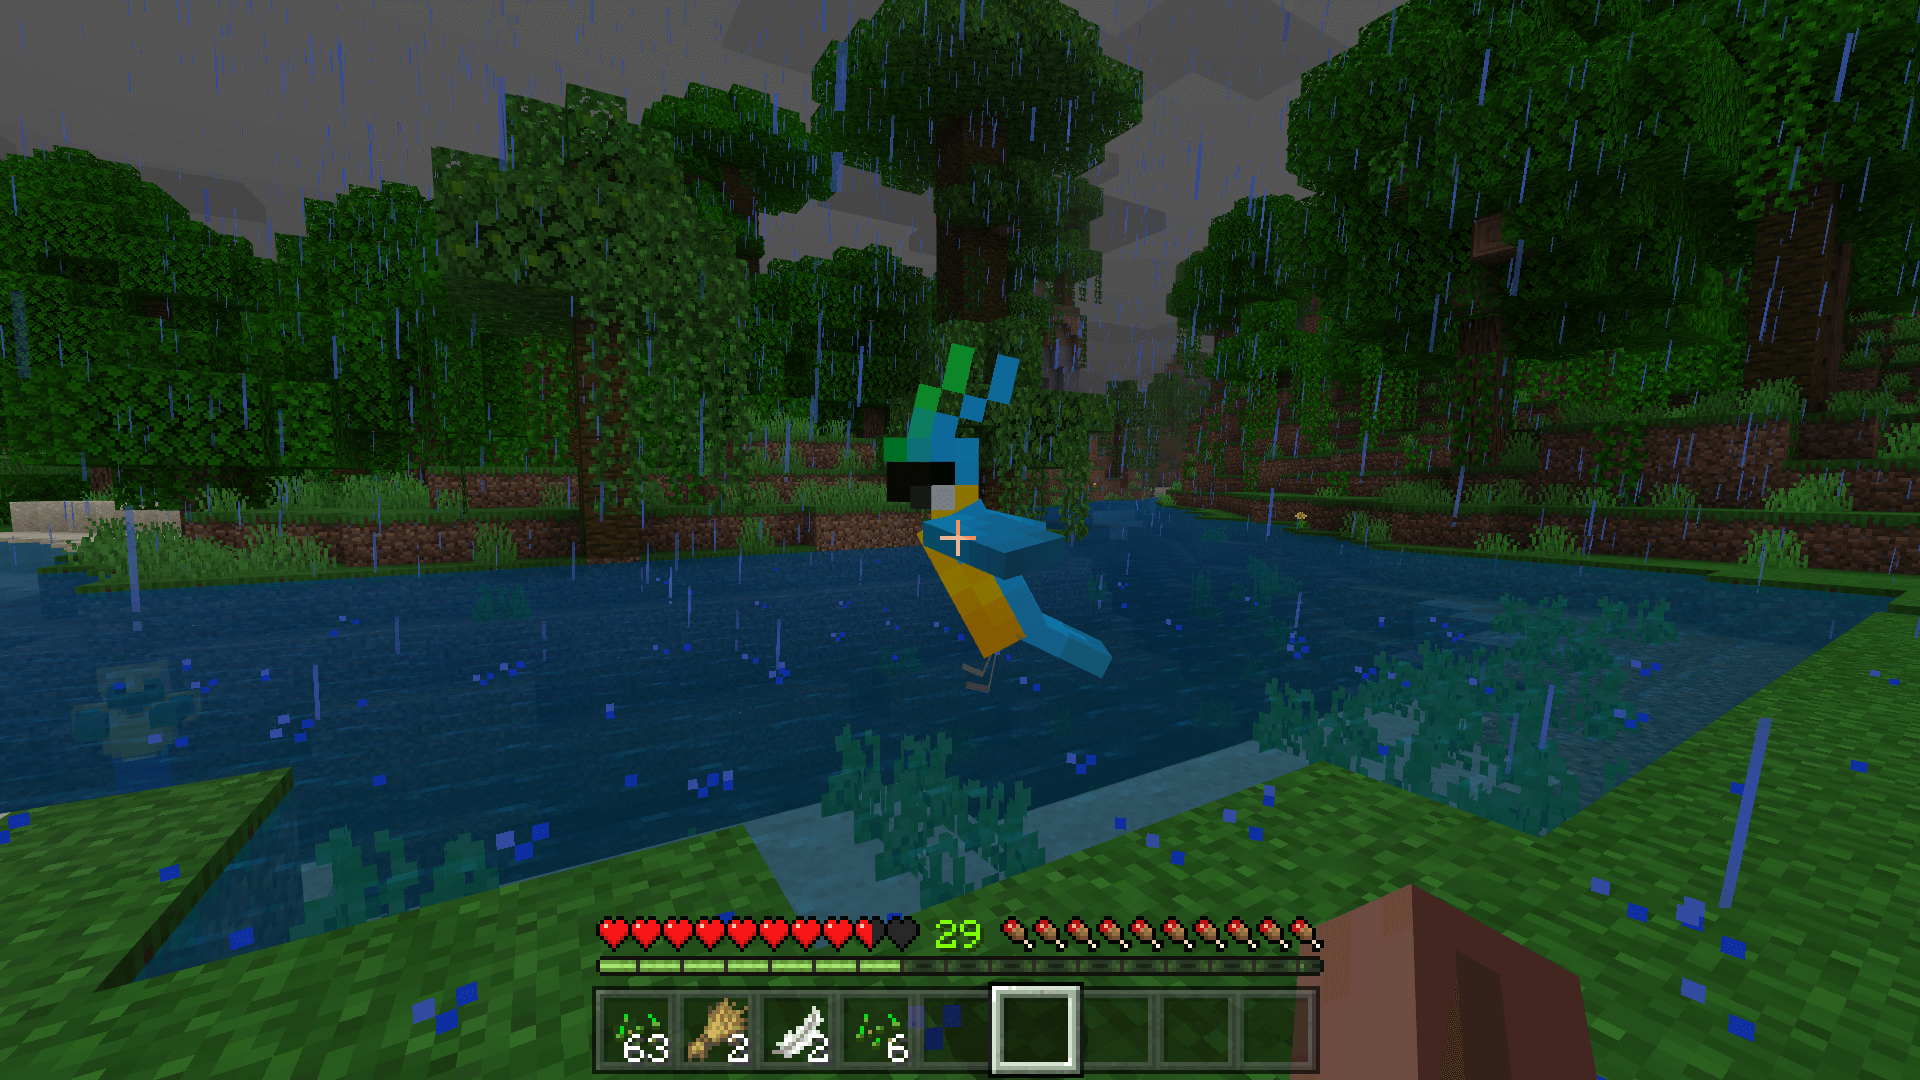 How To Tame A Parrot In Minecraft